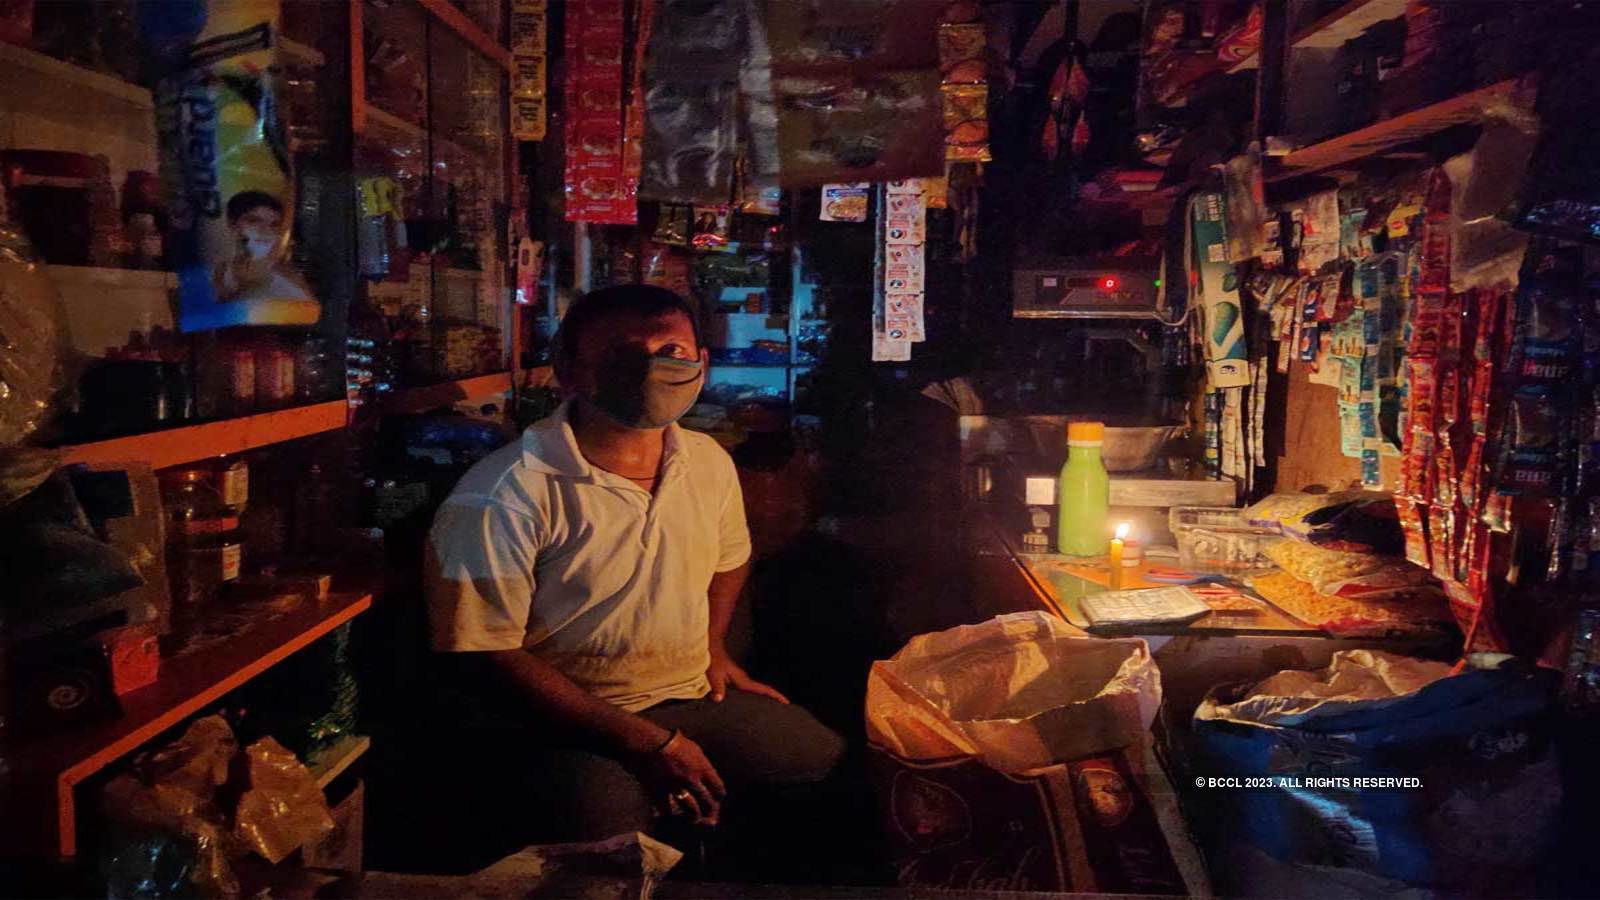 Kashmir Endures Nation's Worst Power Outages, Disrupting Daily Life